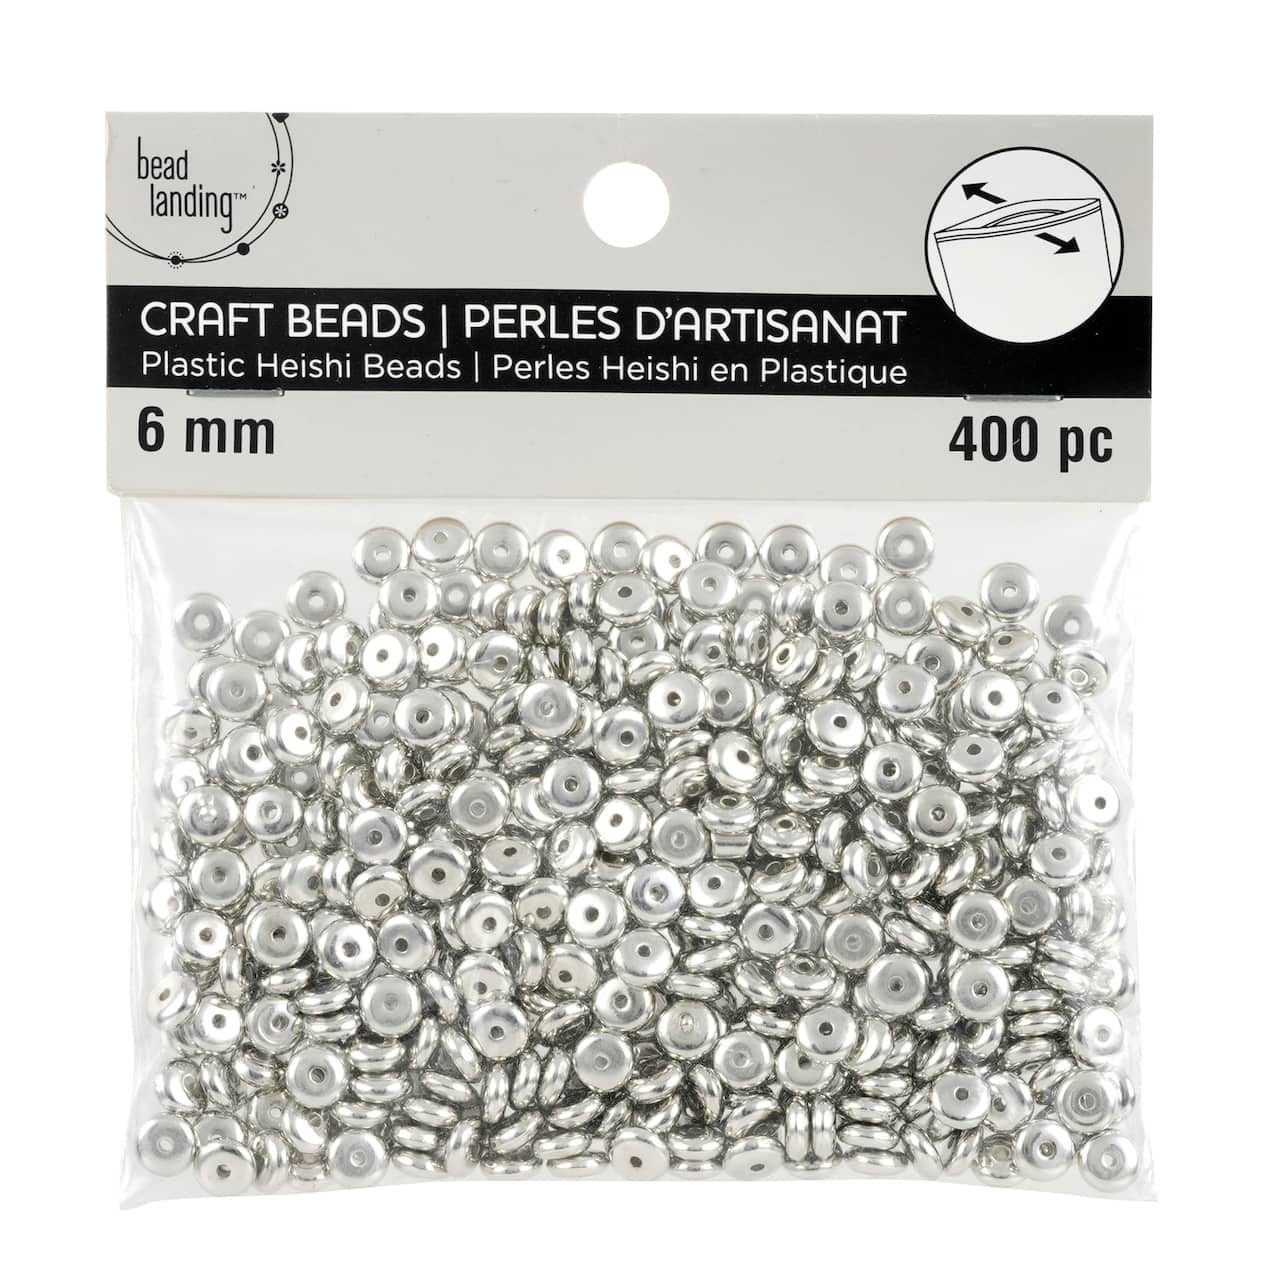 12 Packs: 400 ct. (4,800 total) Silver Plastic Heishi Craft Beads, 6mm by Bead Landing&#x2122;